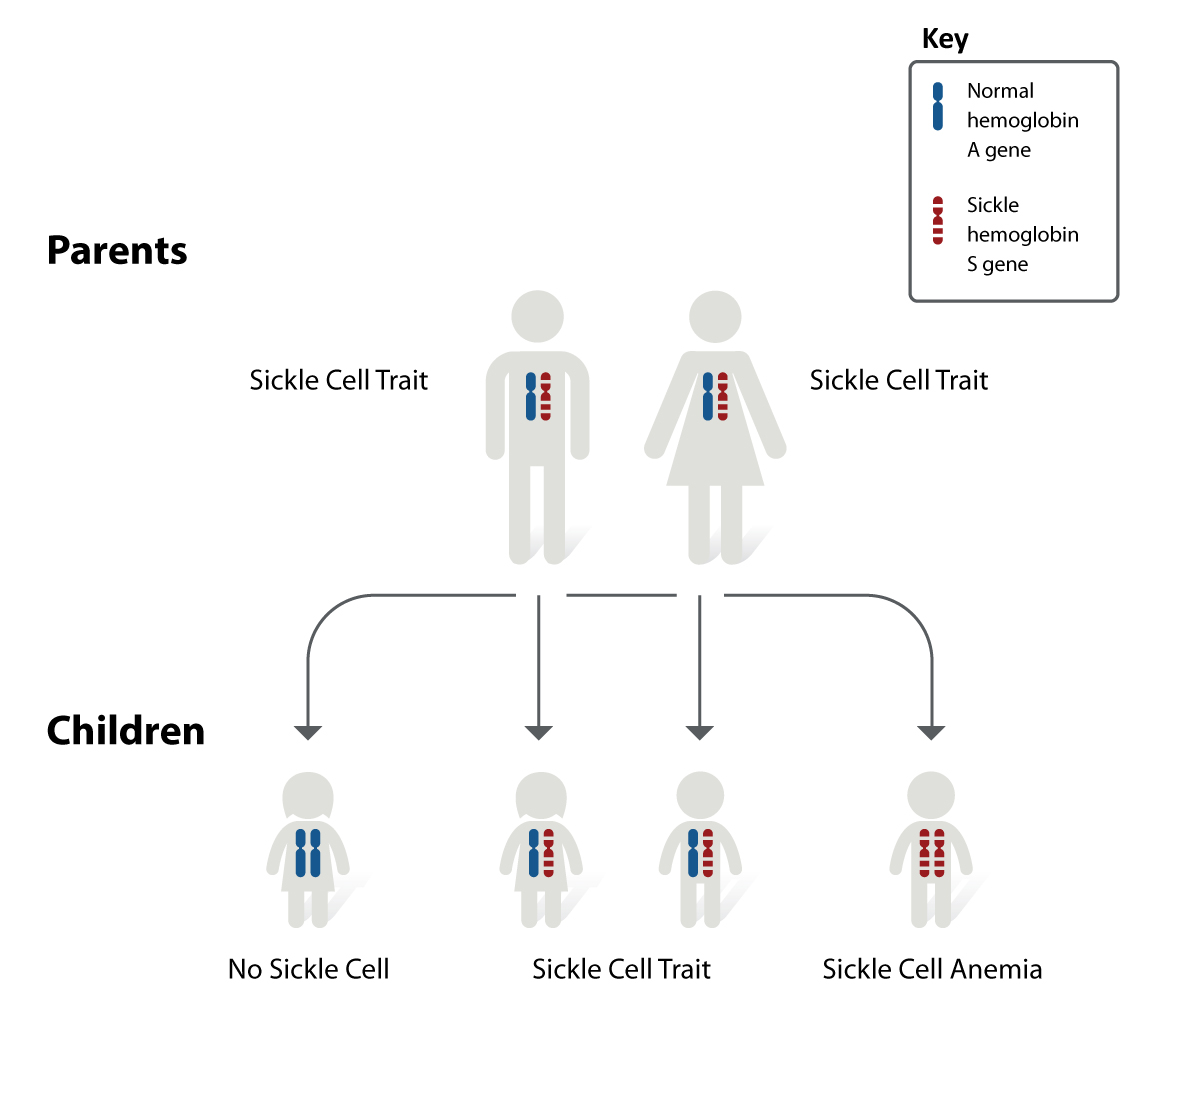  Image showing how sickle cell disease is inherited.